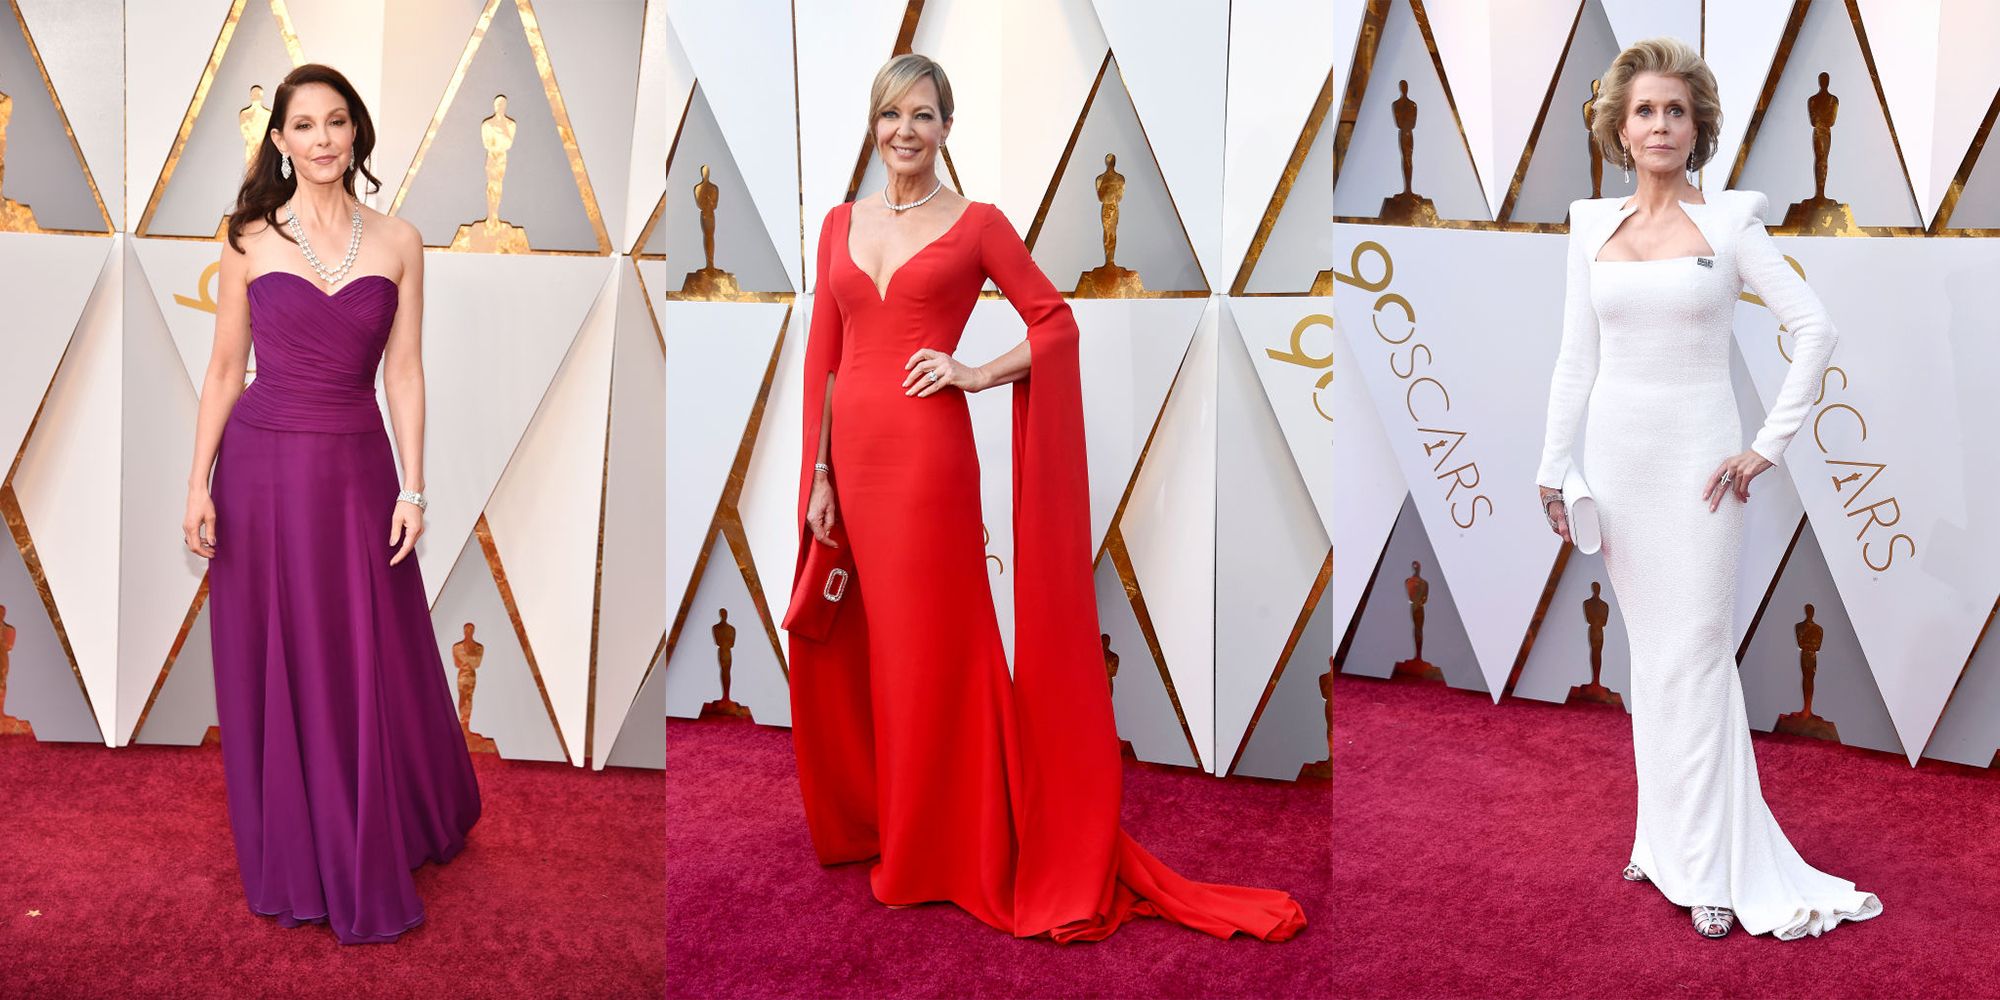 Oscars 2018: The Most Beautiful Red Carpet Dresses And Suits